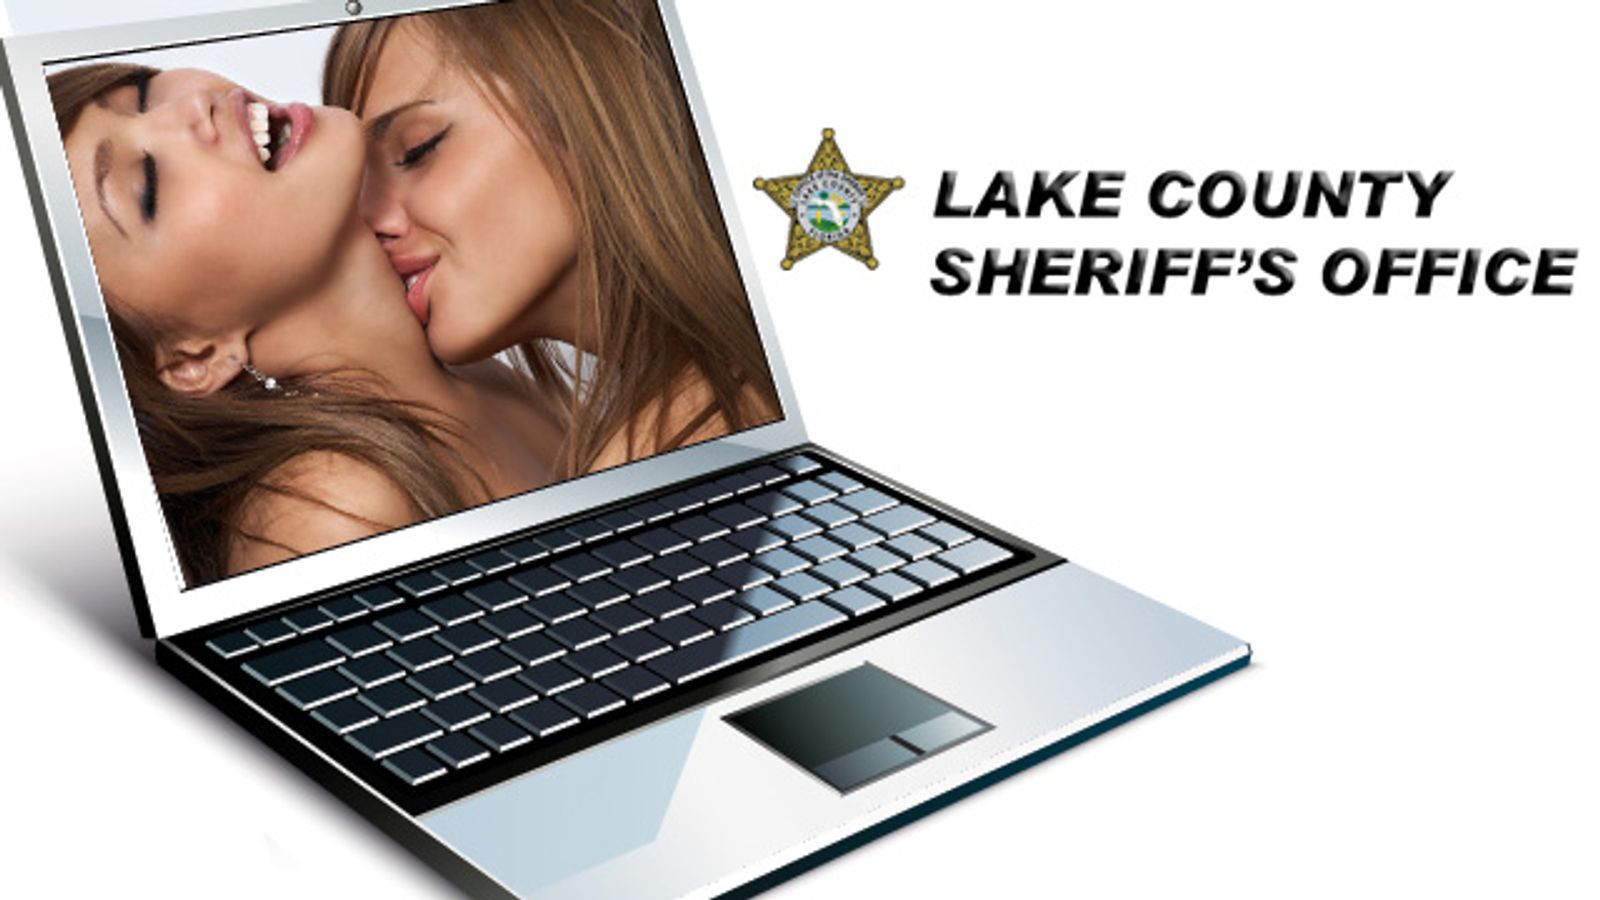 Florida Sheriff's Department IT Tech Resigns in Computer Porn Scandal